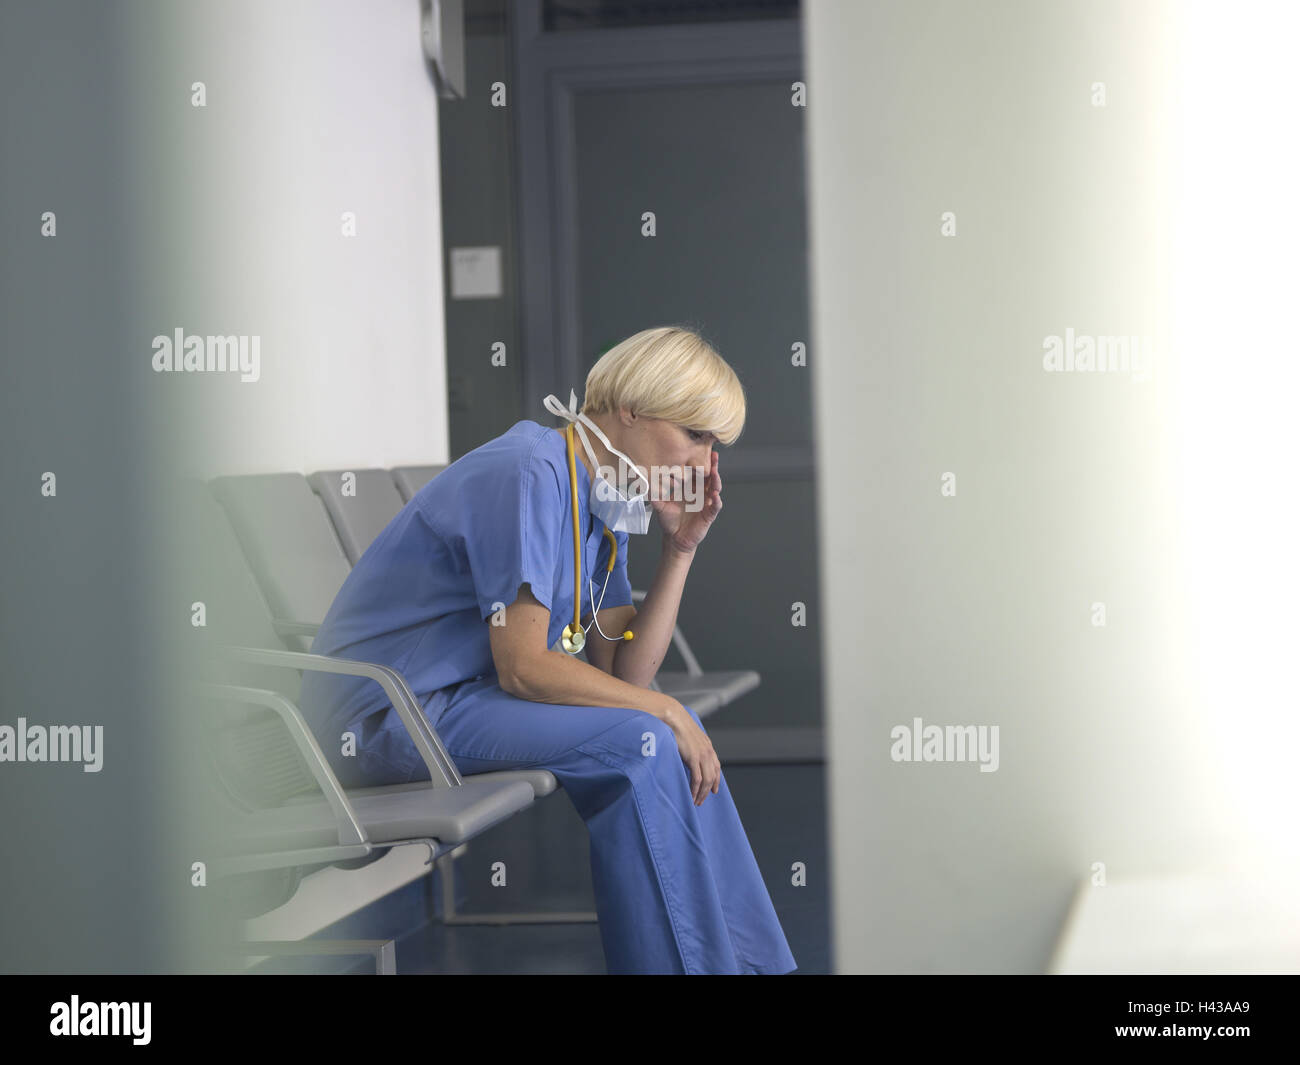 Op. sister, exhausts, thoughtful, clinic, Stock Photo